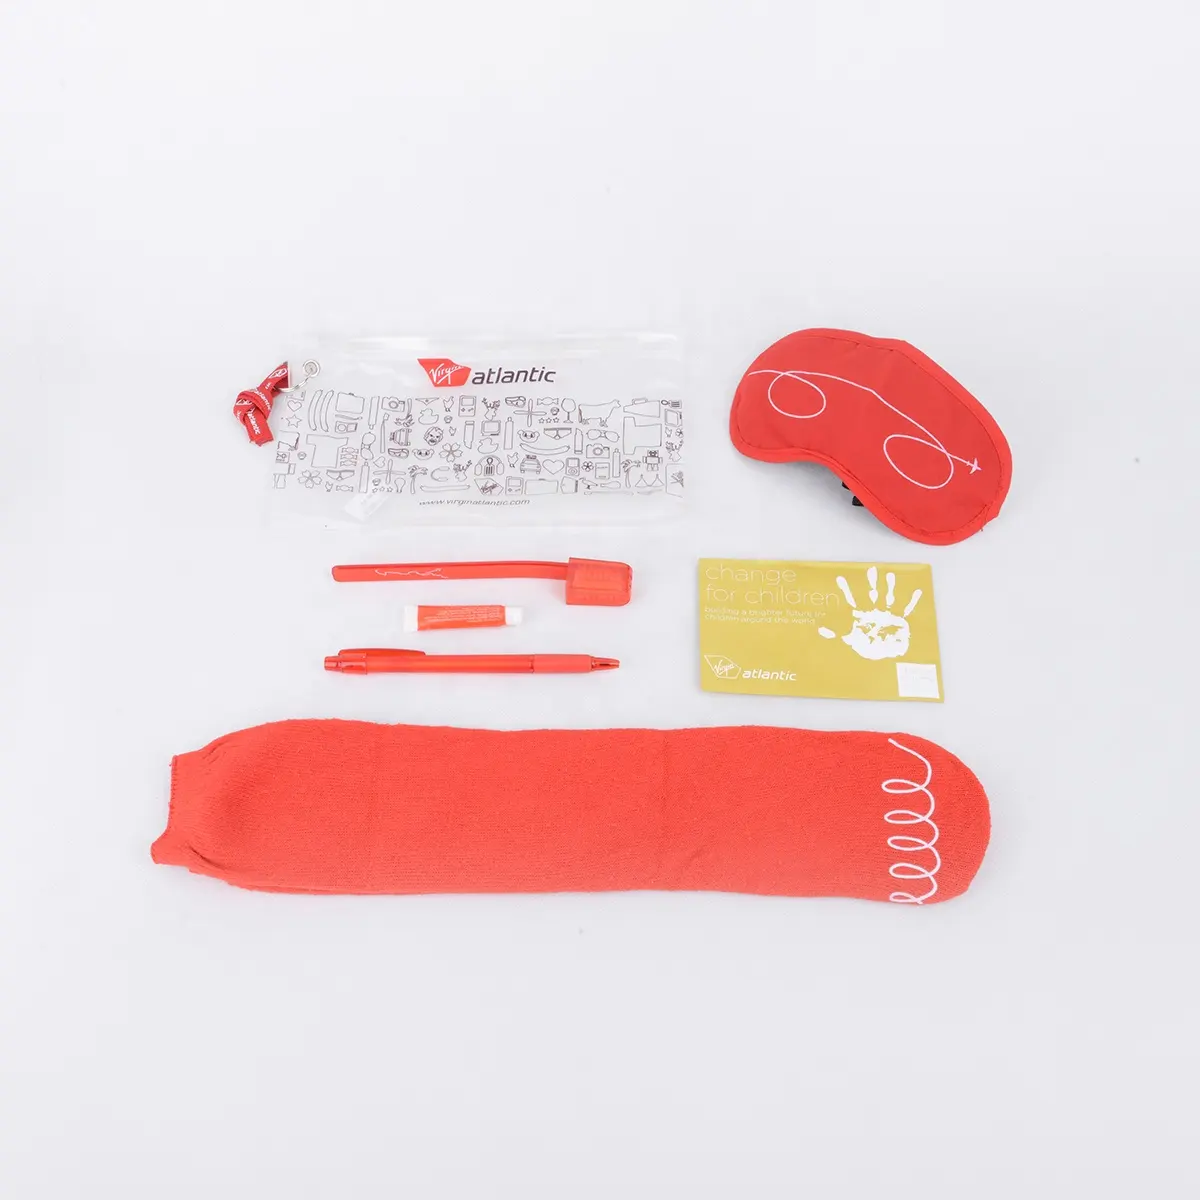 Toothpaste toothbrush Adults promotional travel in-flight airplane amenity kits for airplane